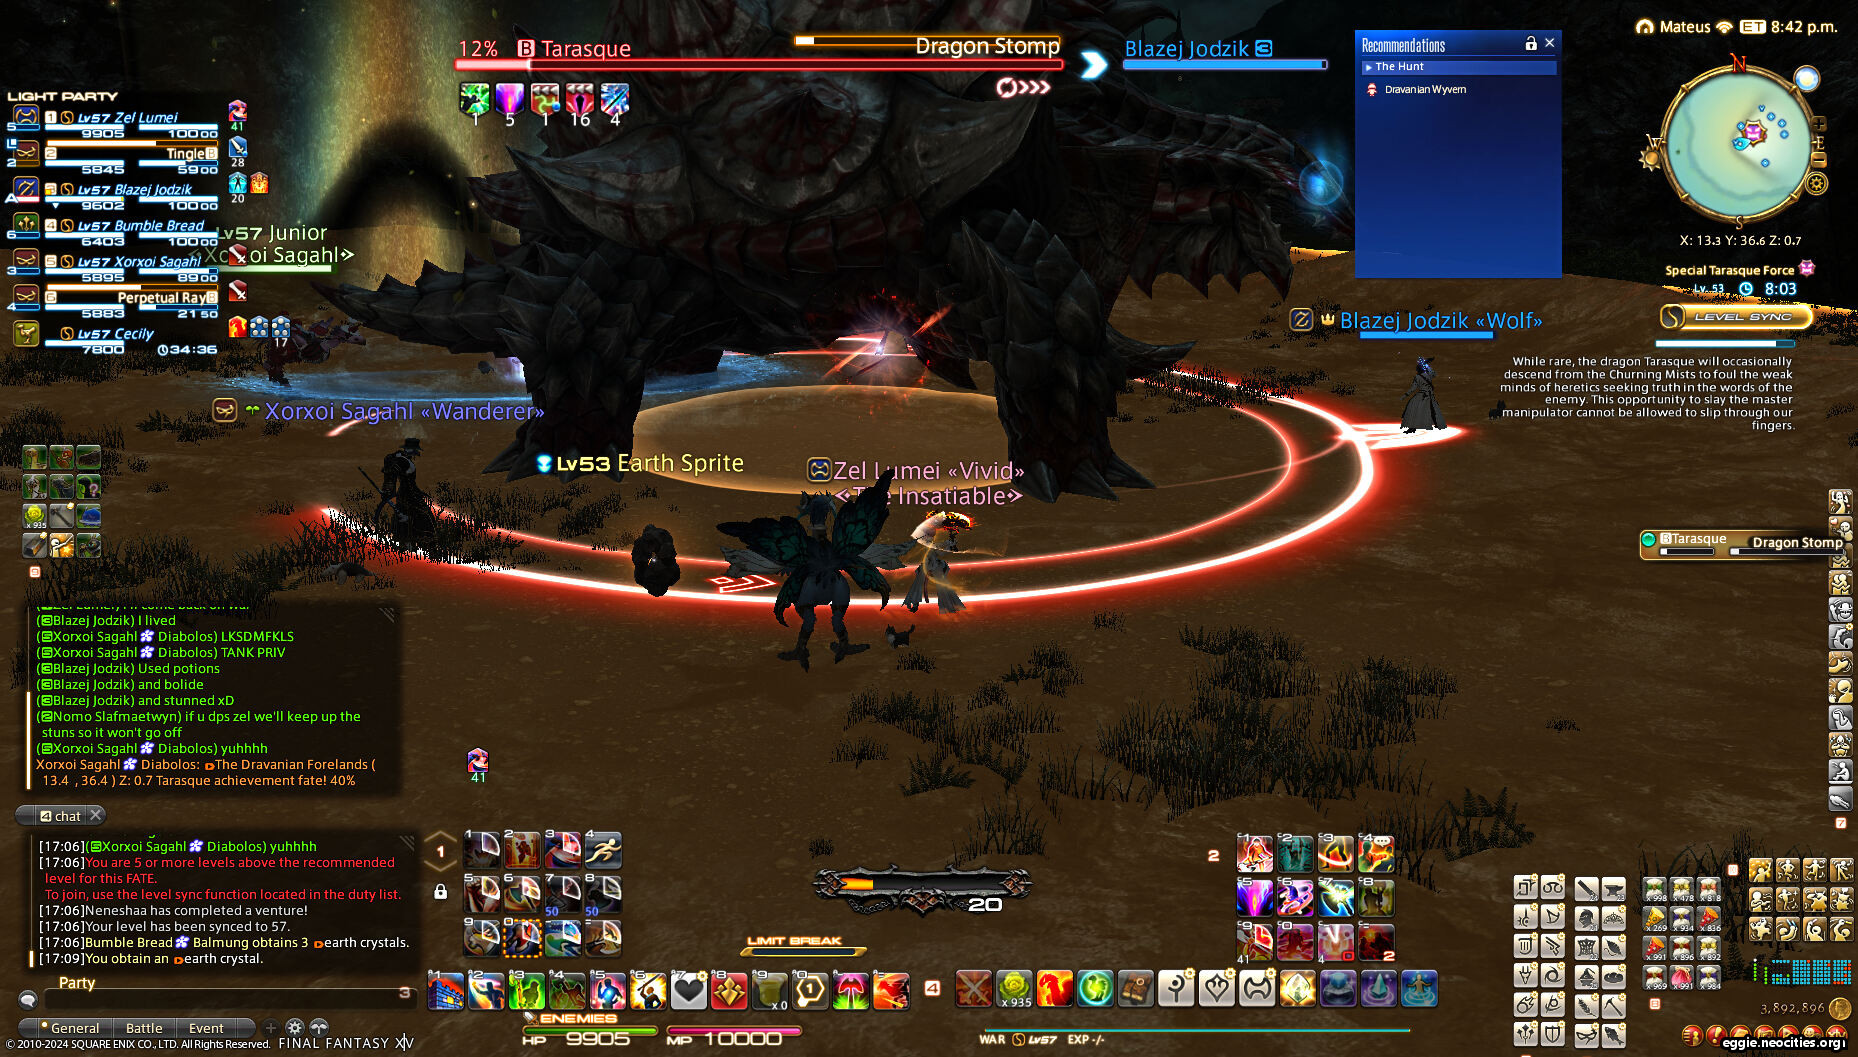 A battle screenshot of Zel with Cecily and a party of strangers fighting Tarasque. The whole ground is marked with an AoE as it uses Dragon Stomp.